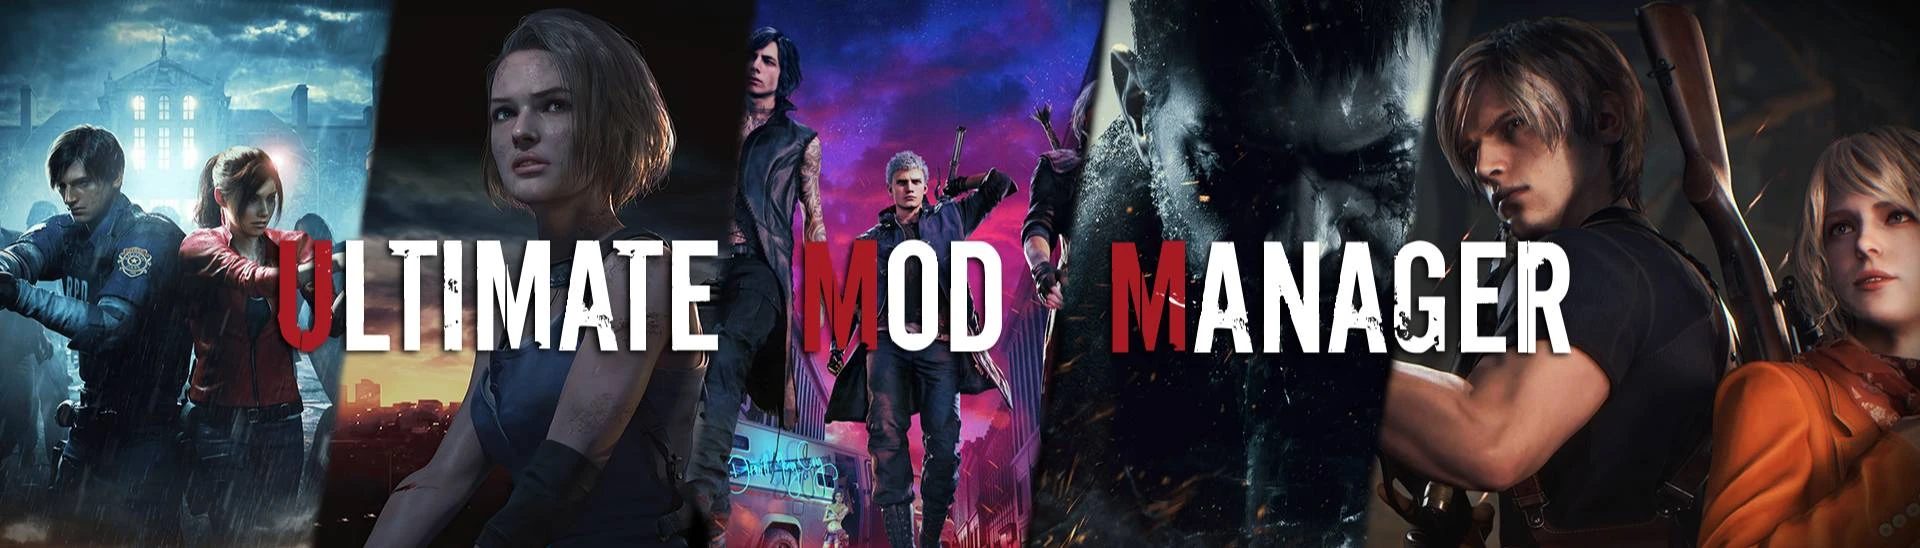 Switch Save Progression] - Devil May Cry 3 Special Edition - Mods